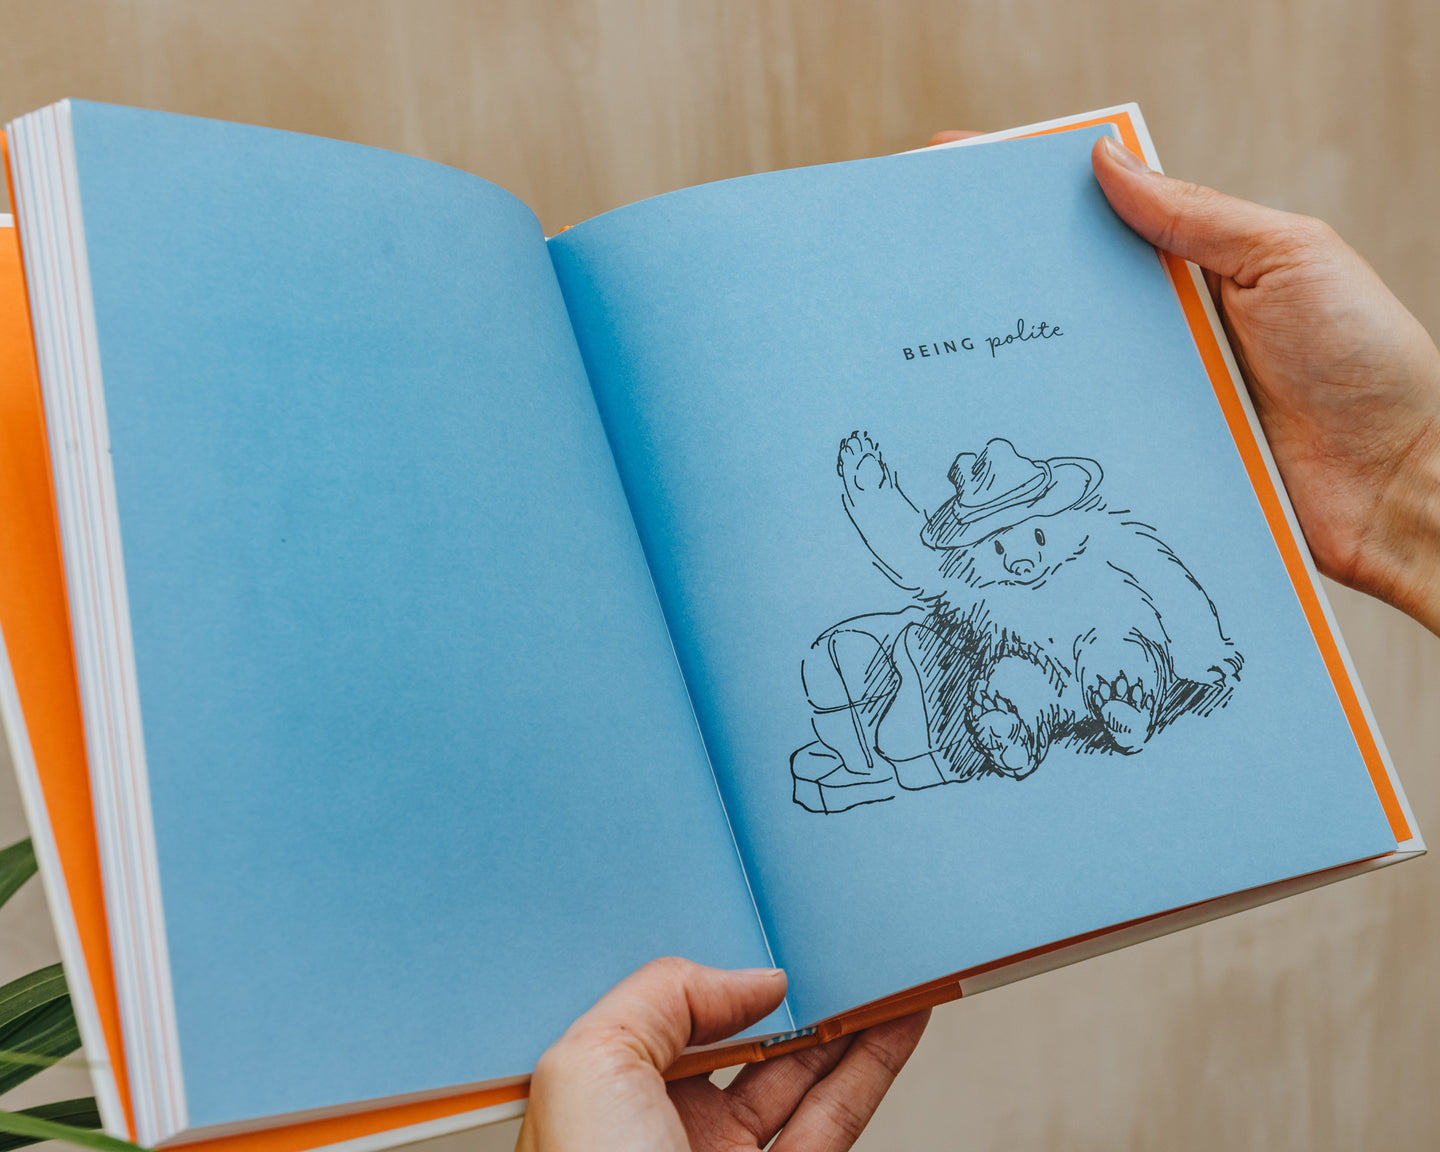 How To Be More Paddington: A Book of Kindness